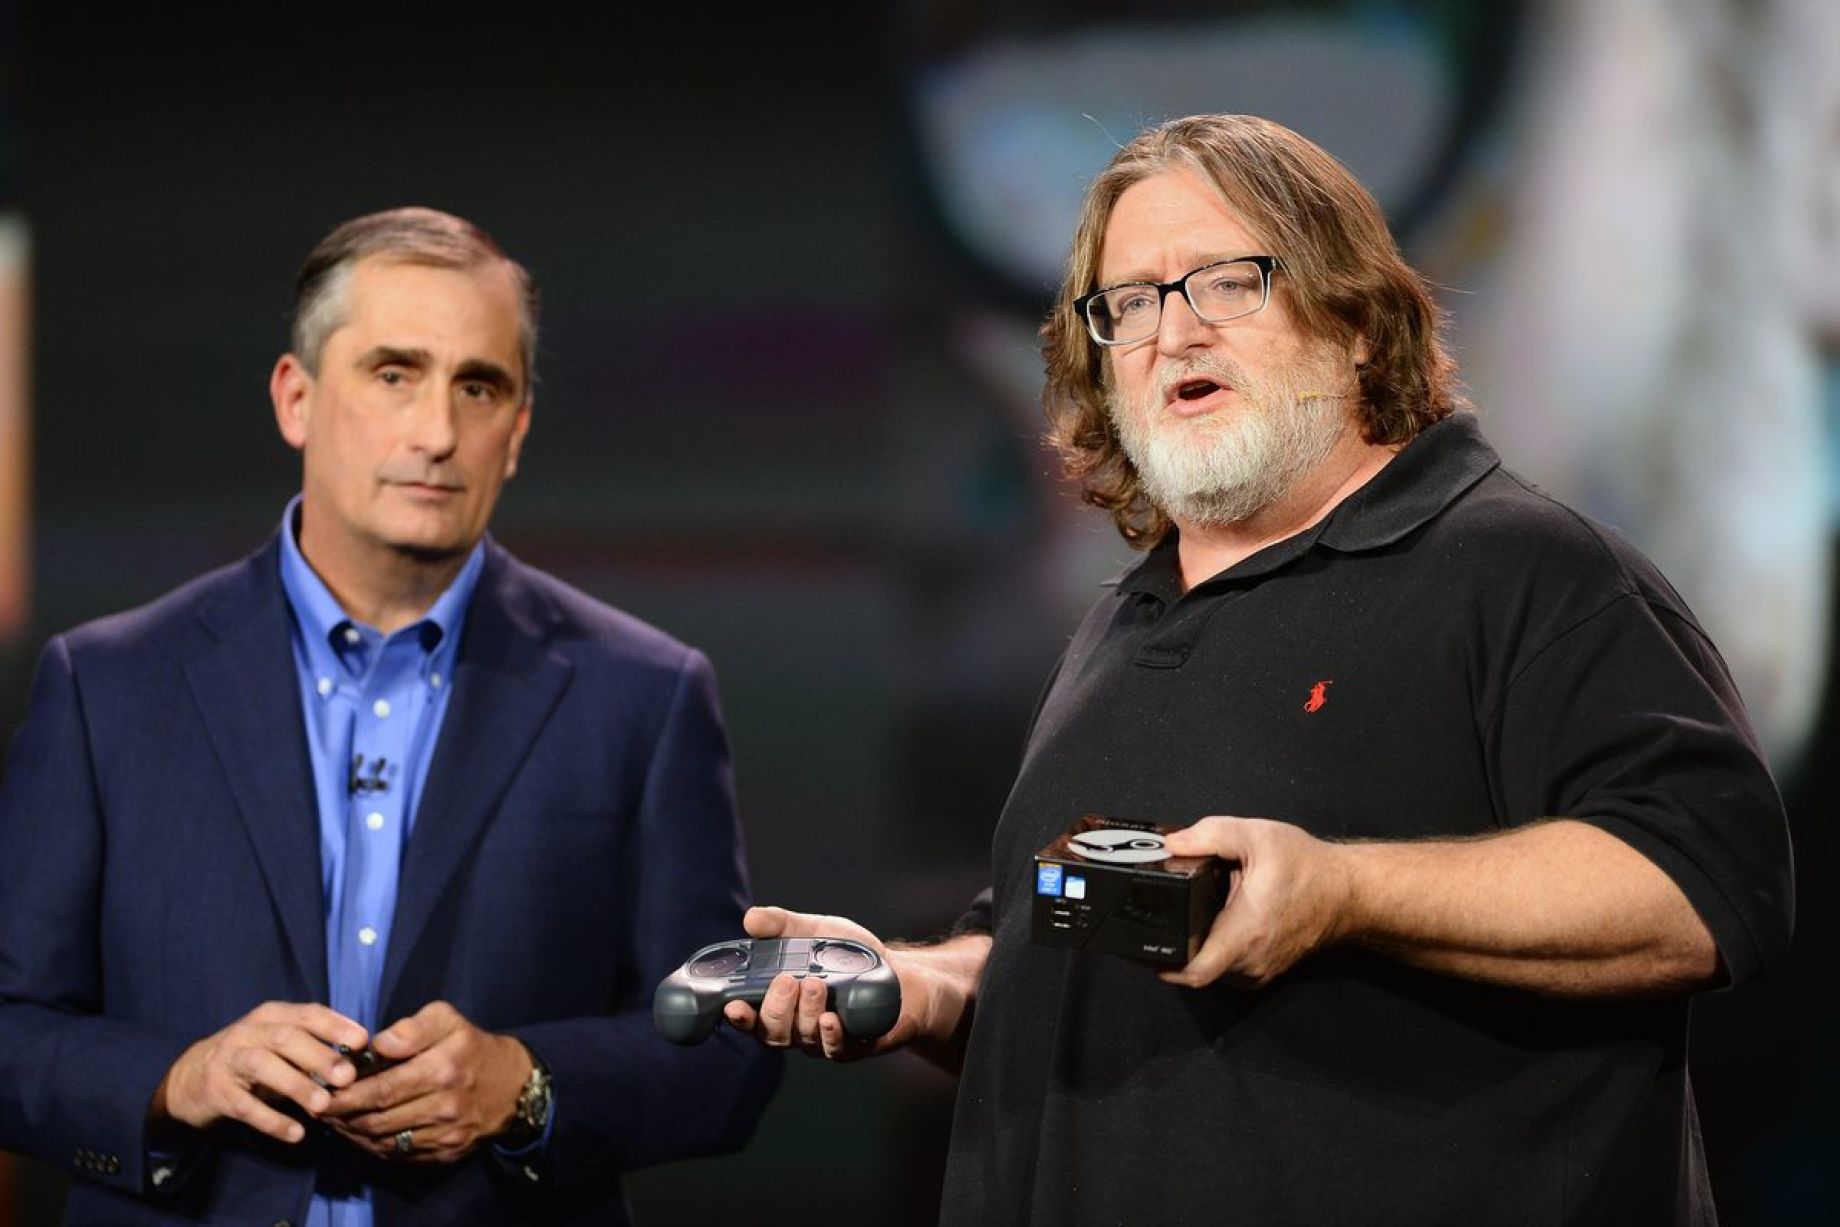 Gabe Newell's $5.5 billion net worth makes him one of the 100 richest  people in the US